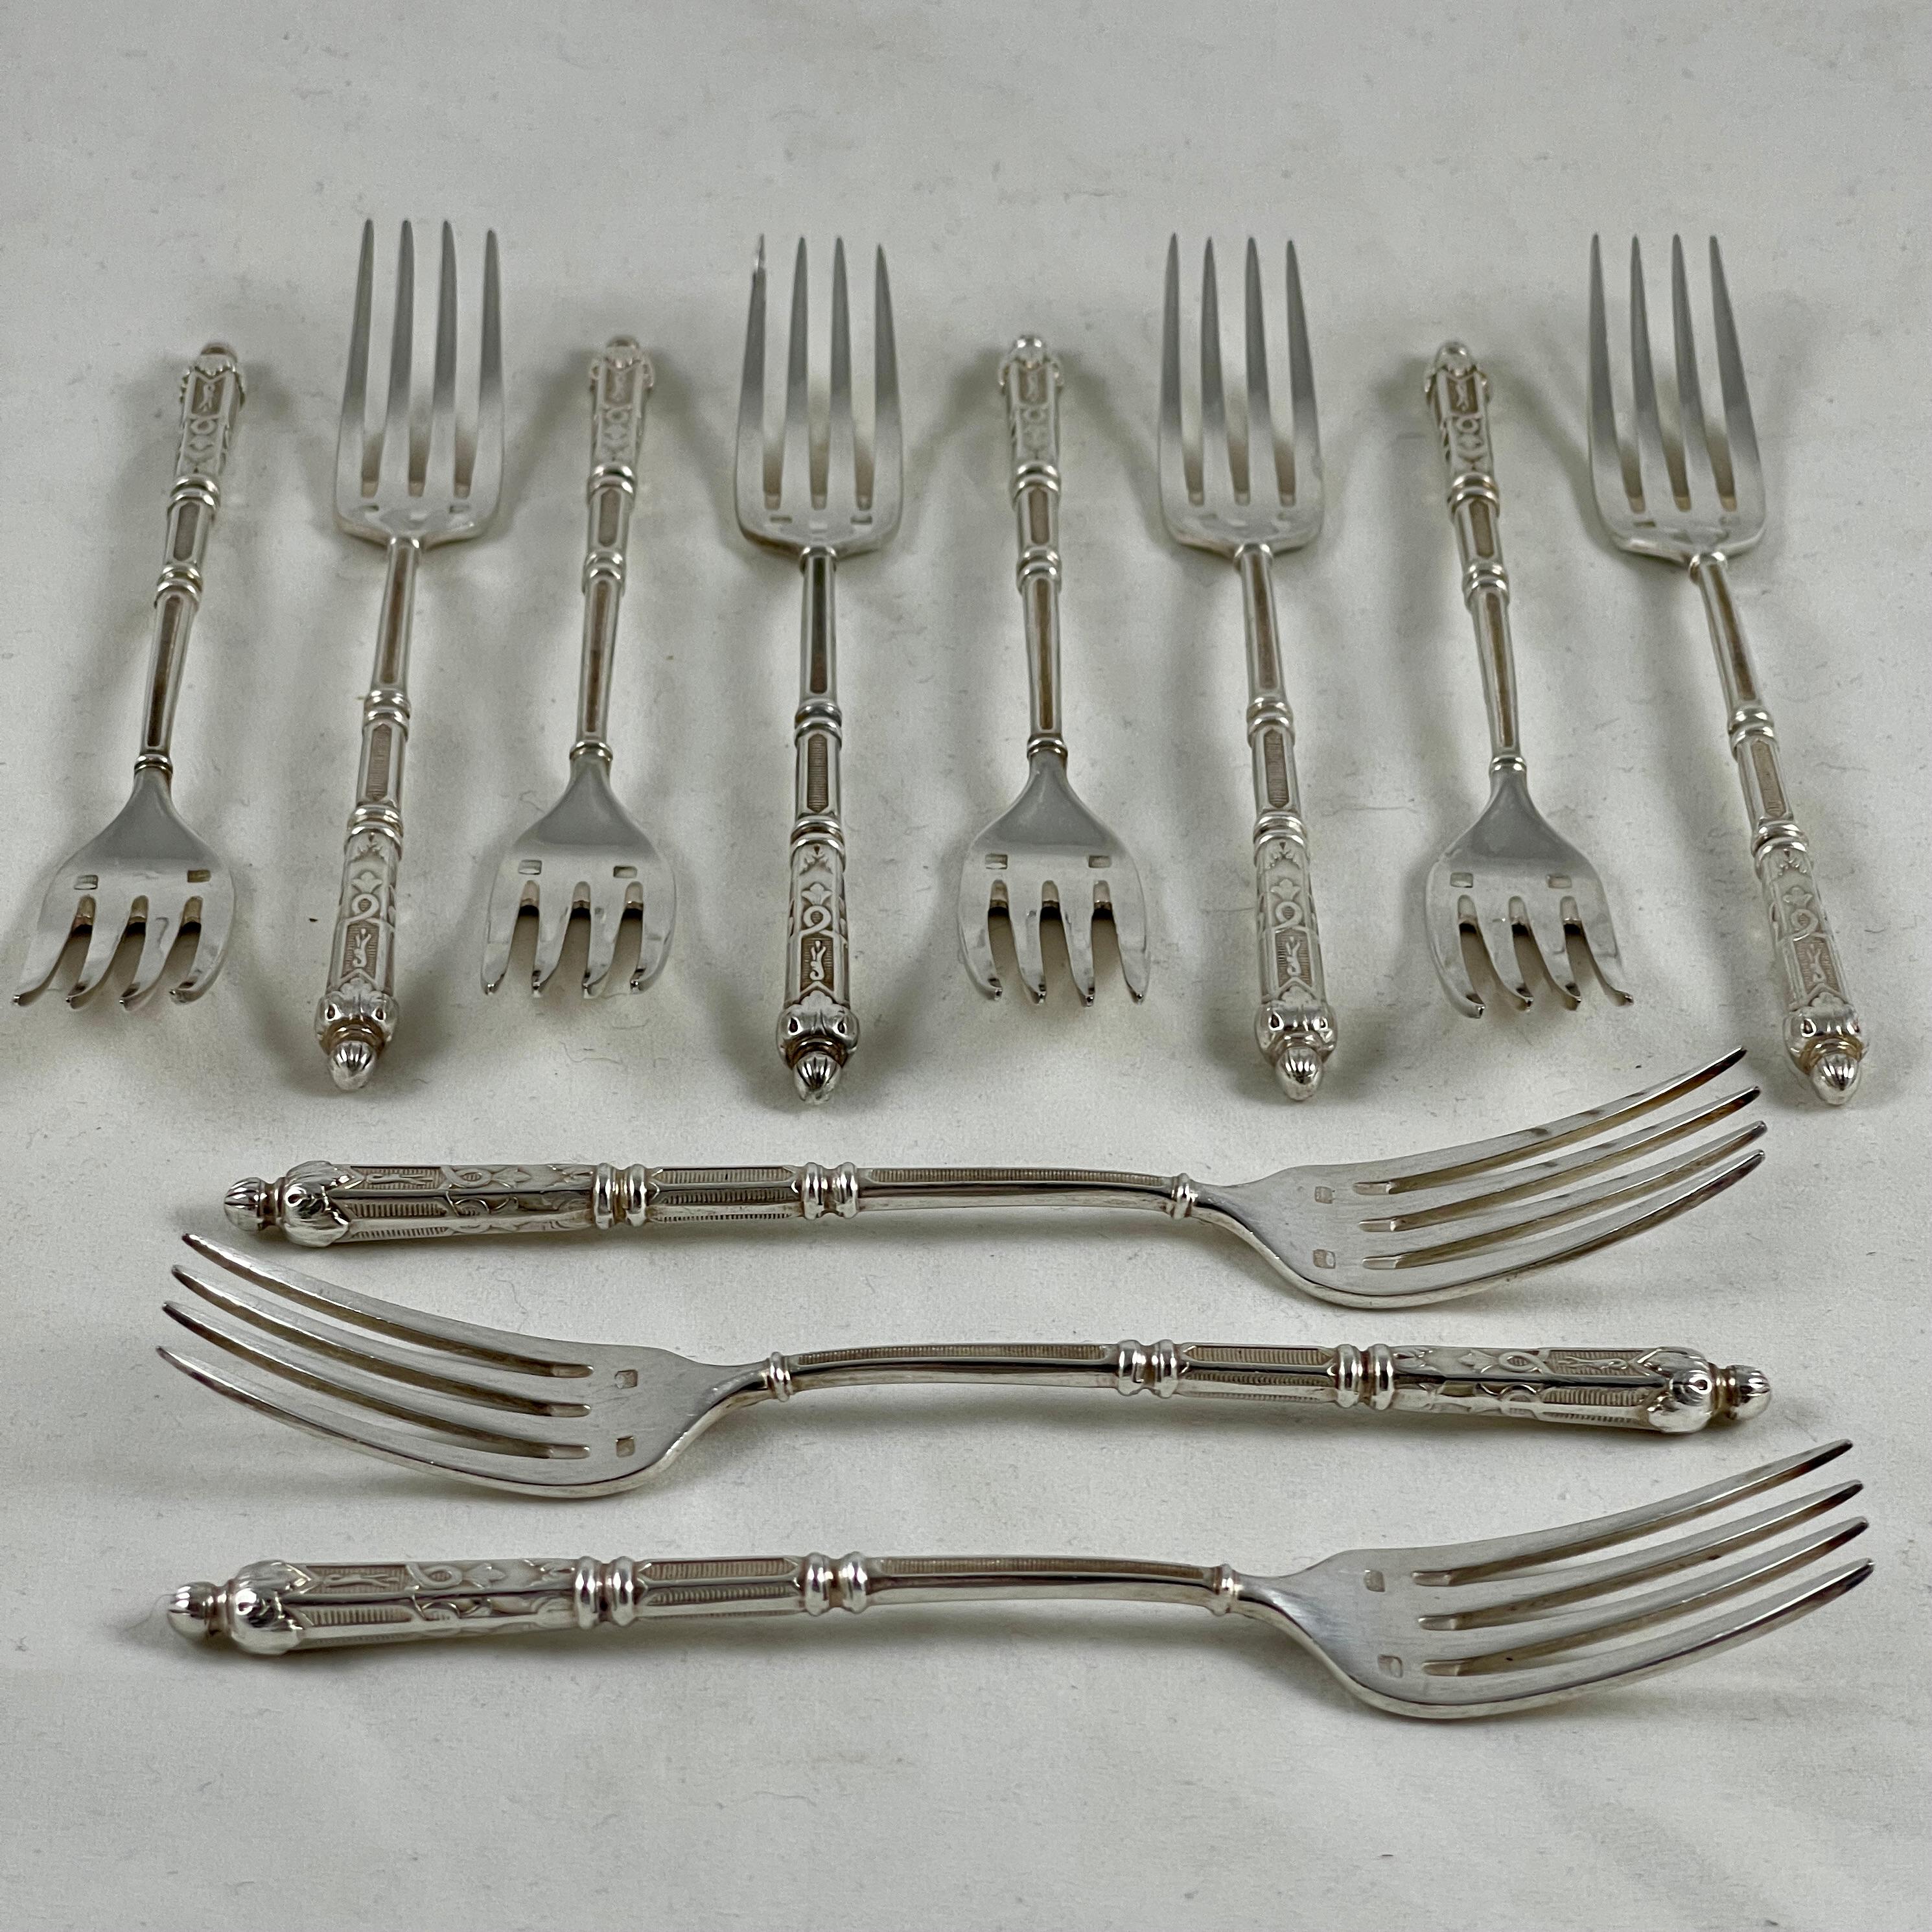 Metalwork Second Empire French Napoleon III Silver Plate Ornate Dessert Forks, S/11 For Sale